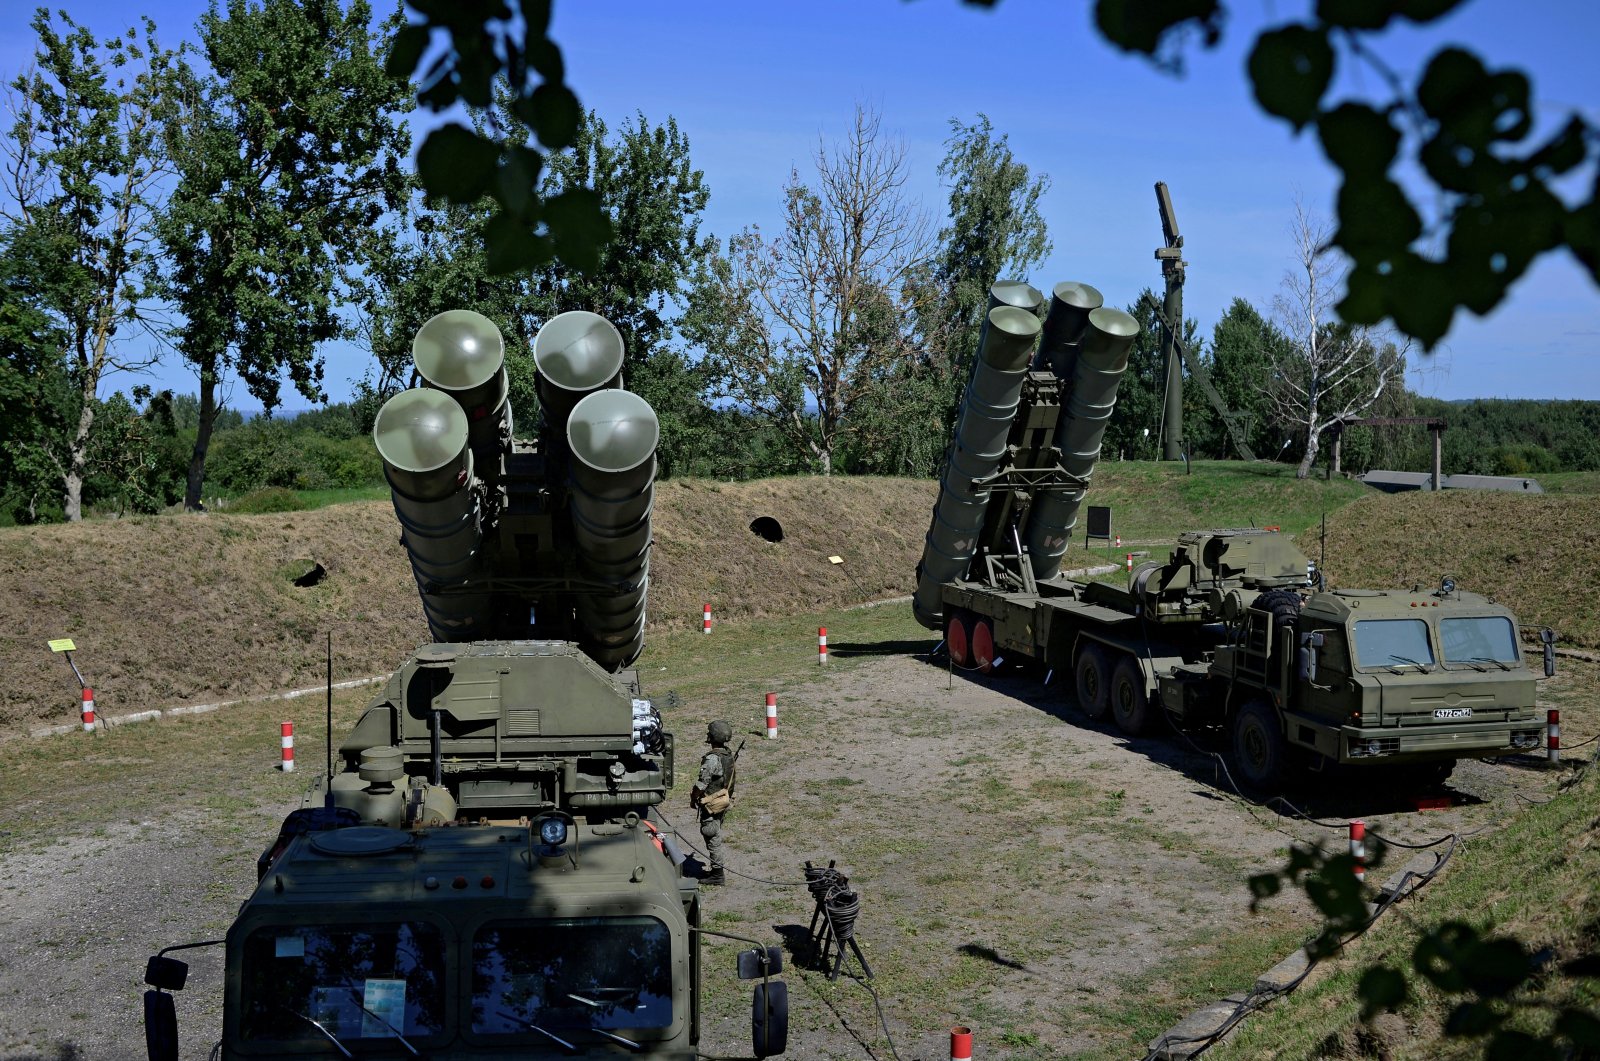 Russian S-400 missile air defense systems are seen during a training exercise at a military base in Kaliningrad region, Russia, Aug. 11, 2020. (Reuters Photo)